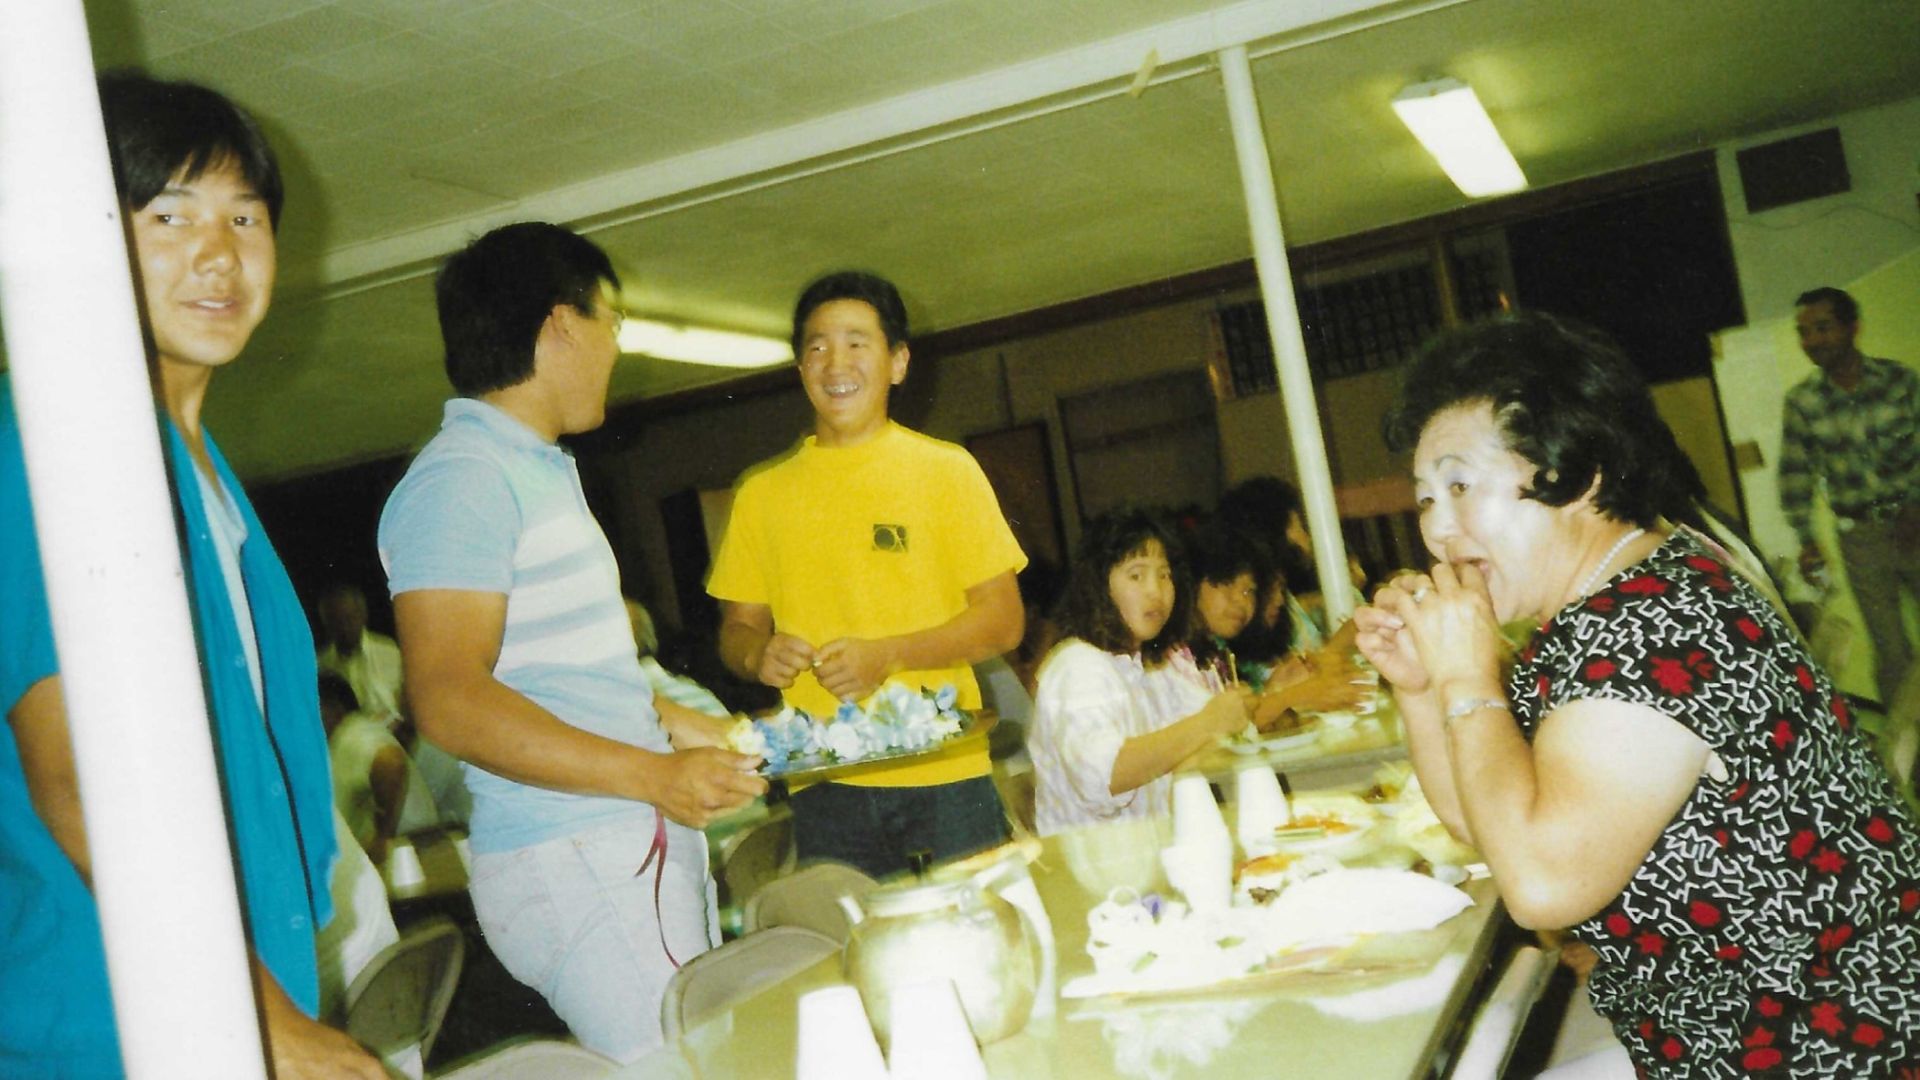 sangha sharing a meal top photo 1988 provided by seiko go  